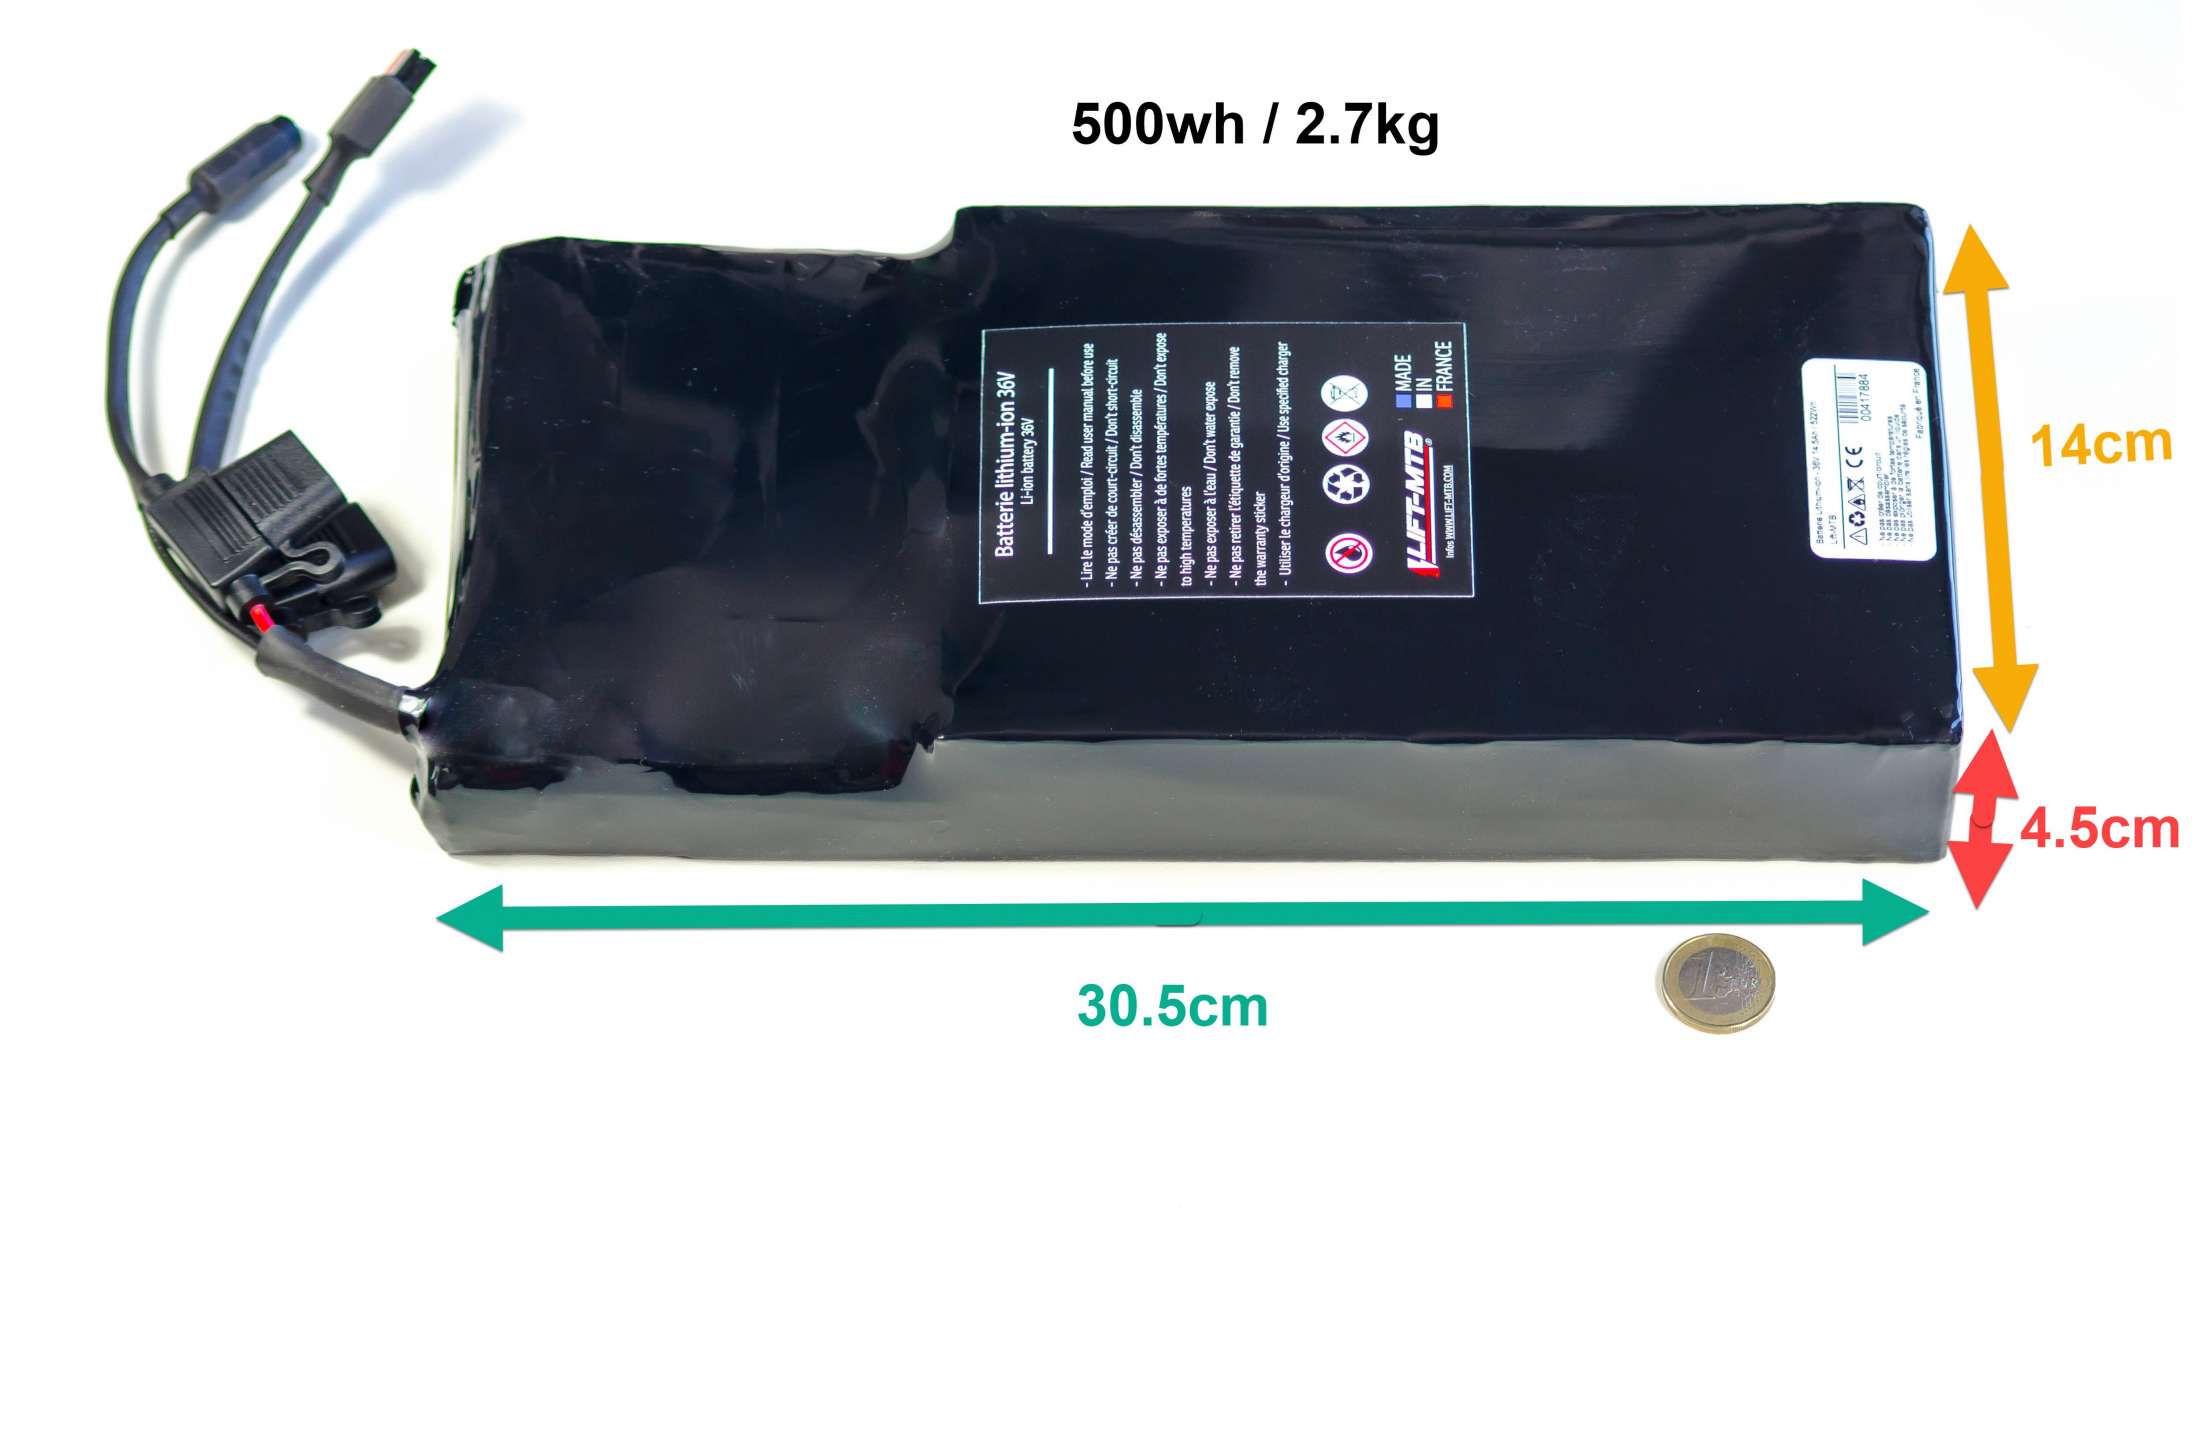 500wh battery